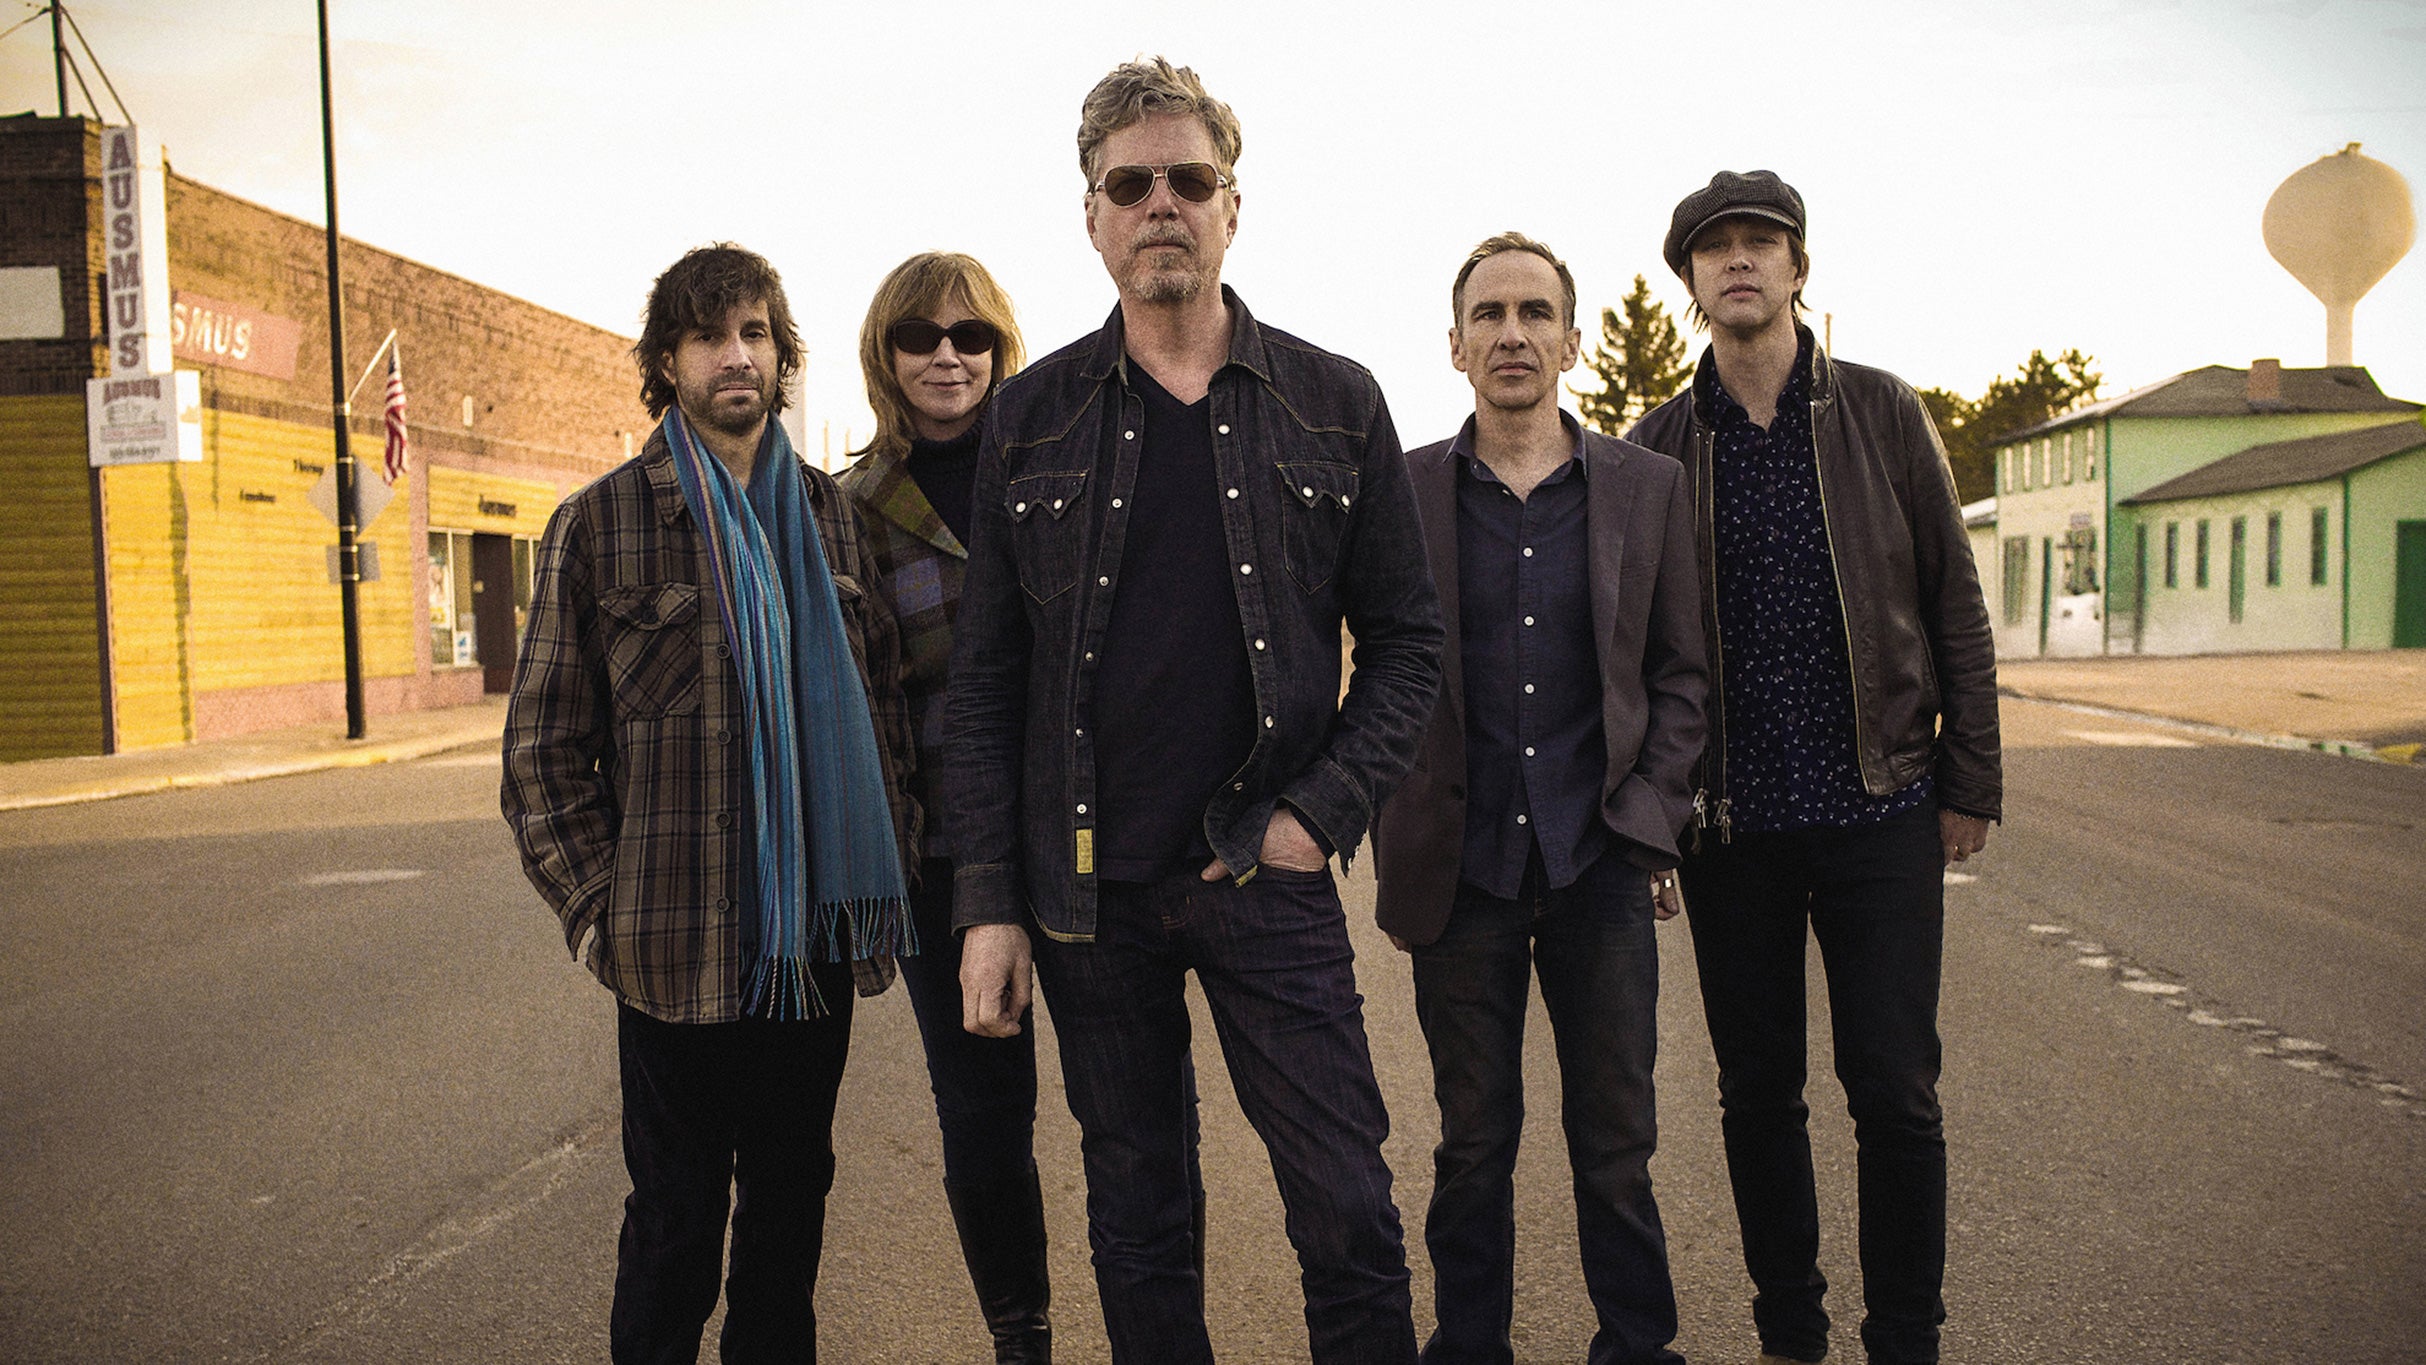 JBM Promotions and Memorial Hall present The Jayhawks